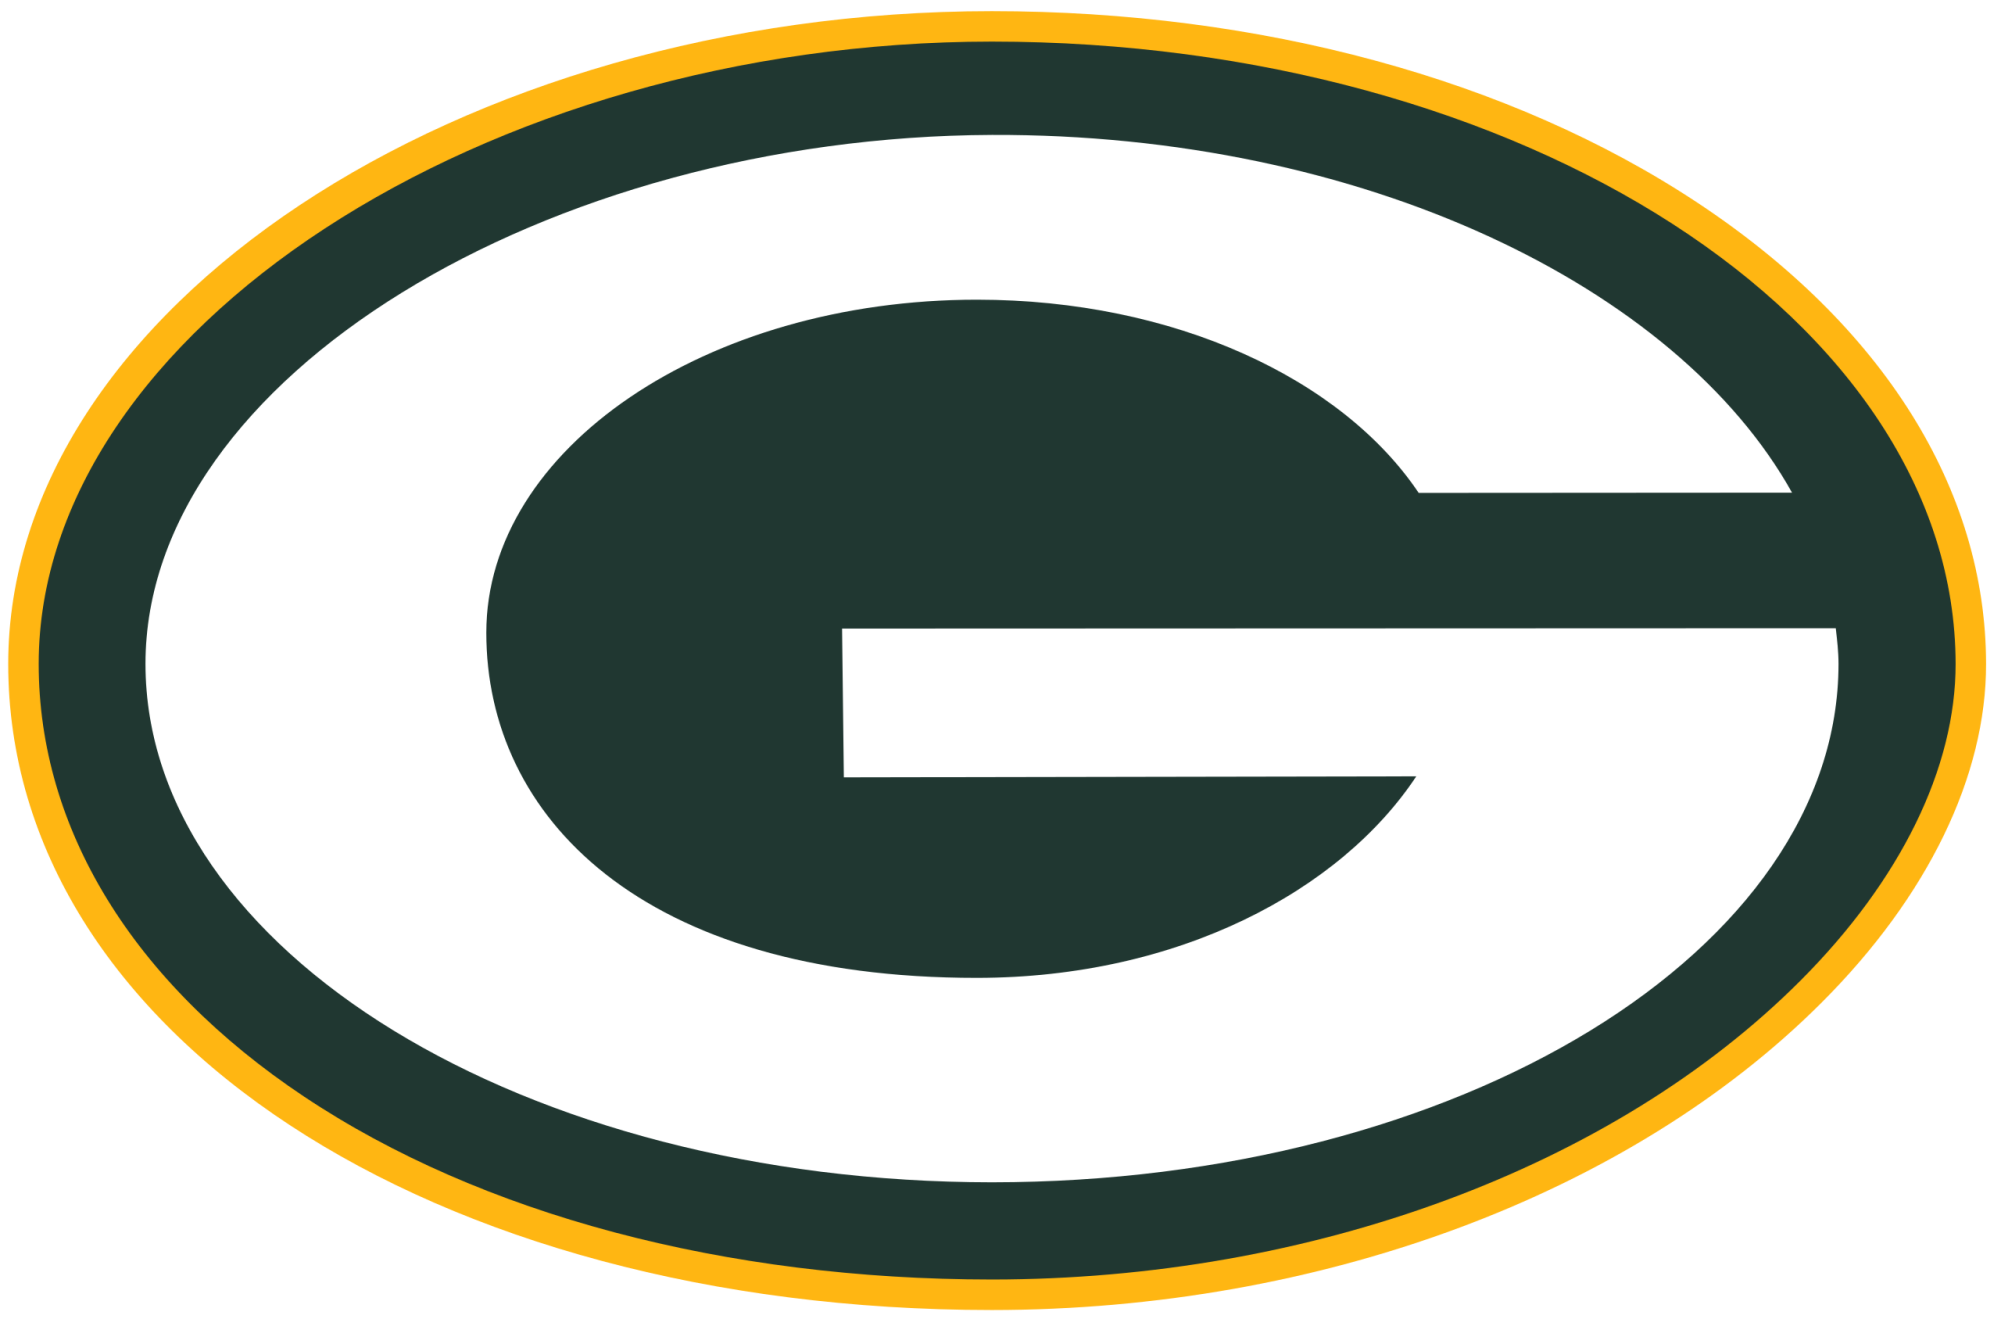 NFC #7 Seed: Green Bay Packers